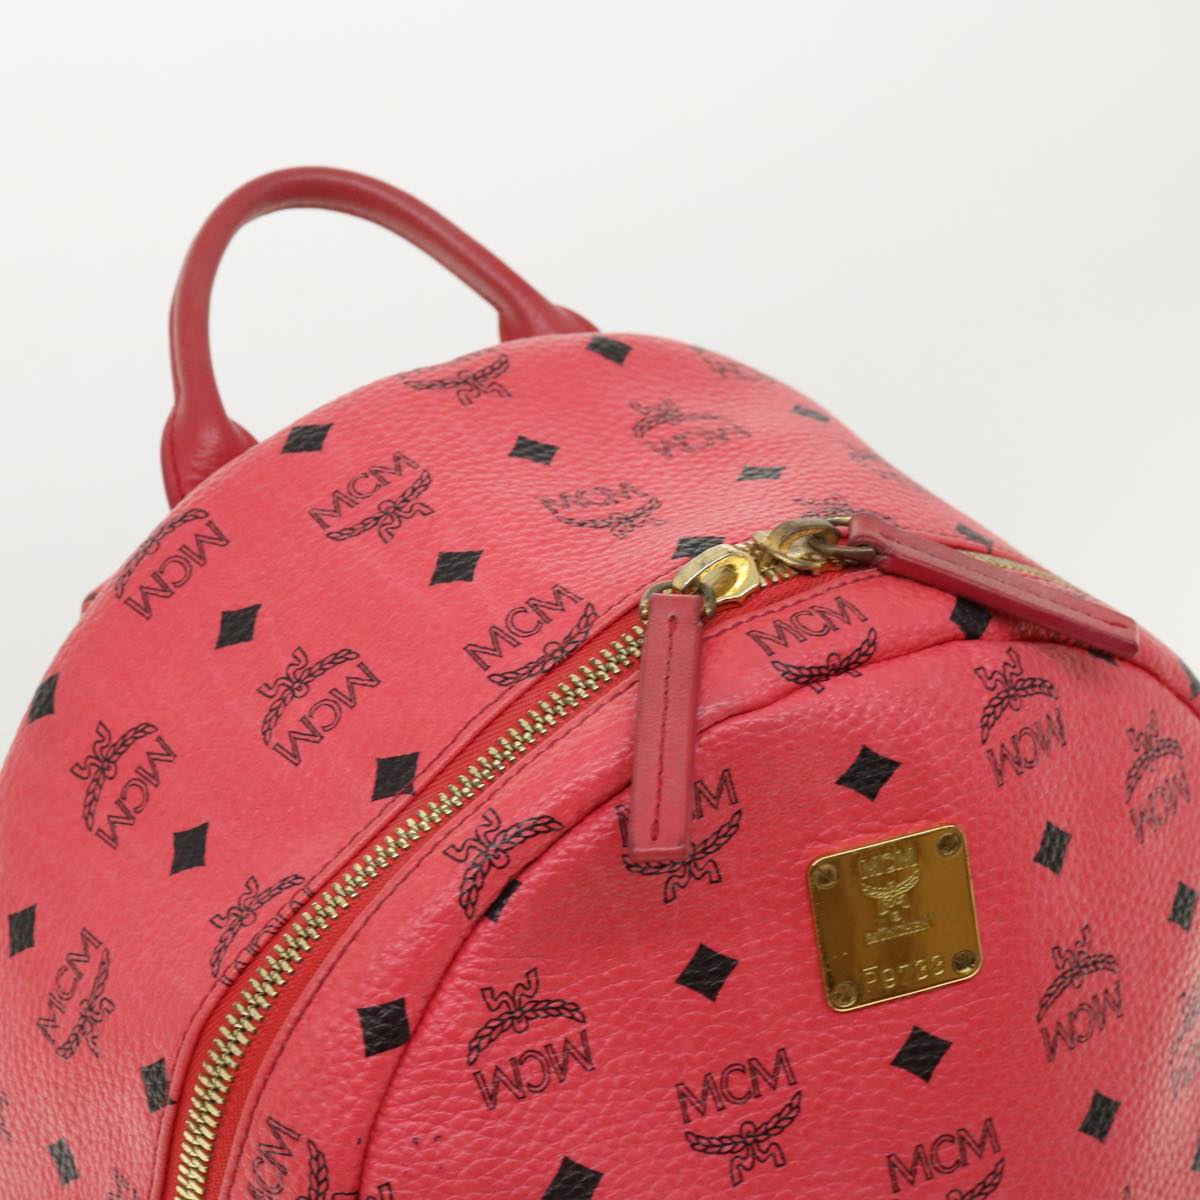 MCM Vicetos Backpack PVC Leather Pink Auth yk5128